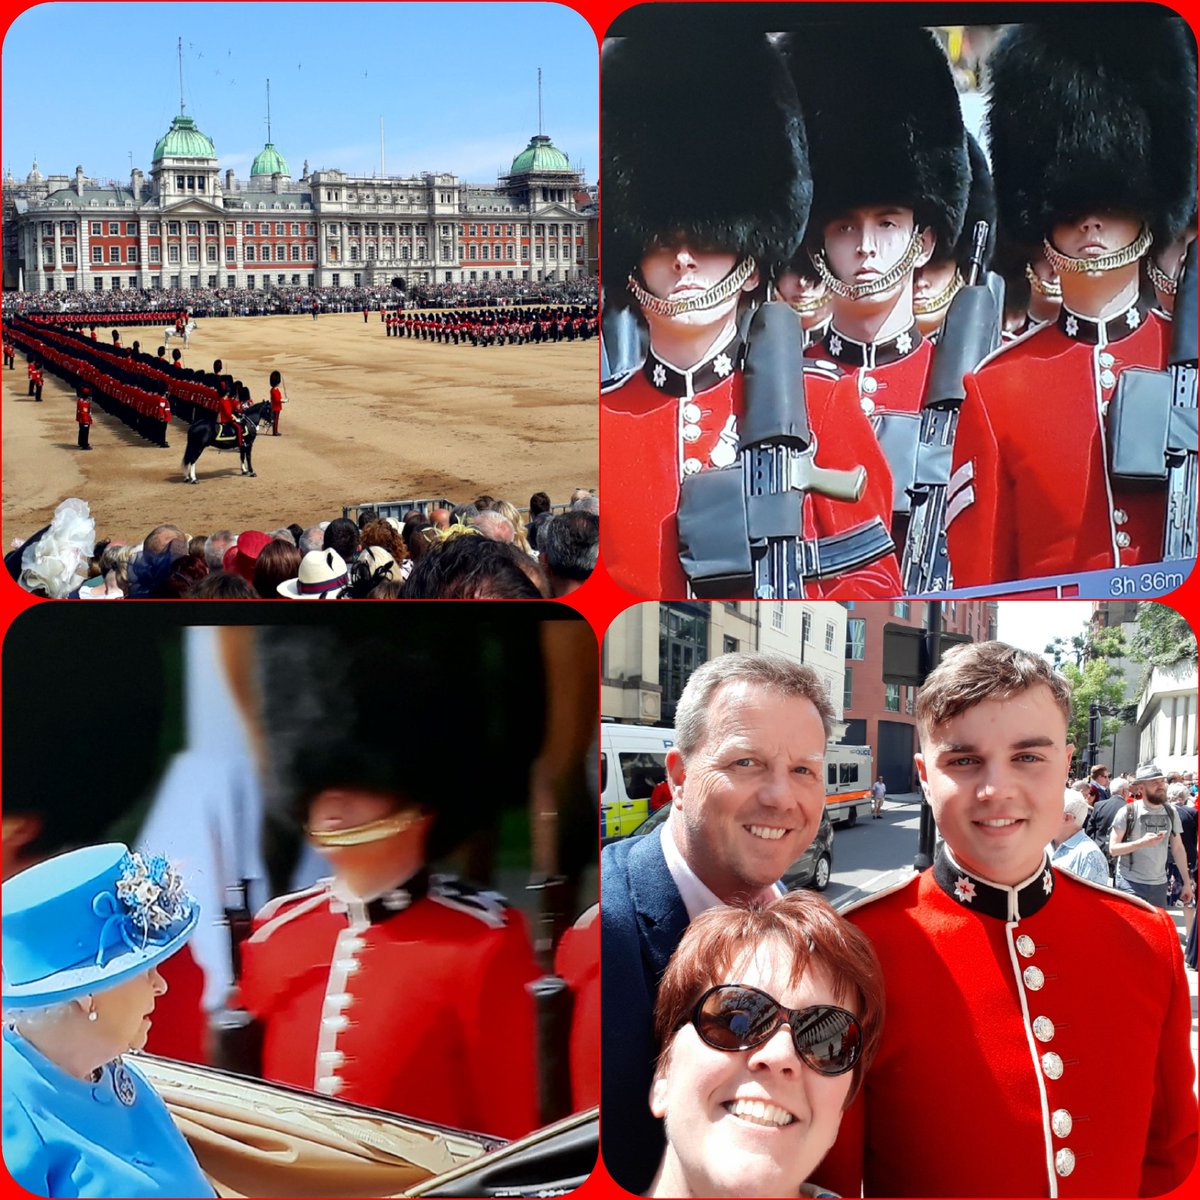 What a privilege to see the lad perform in the Queen's Birthday Parade today. A real honour to be there. #TroopingTheColour #escorttothecolour #ColdstreamGuards